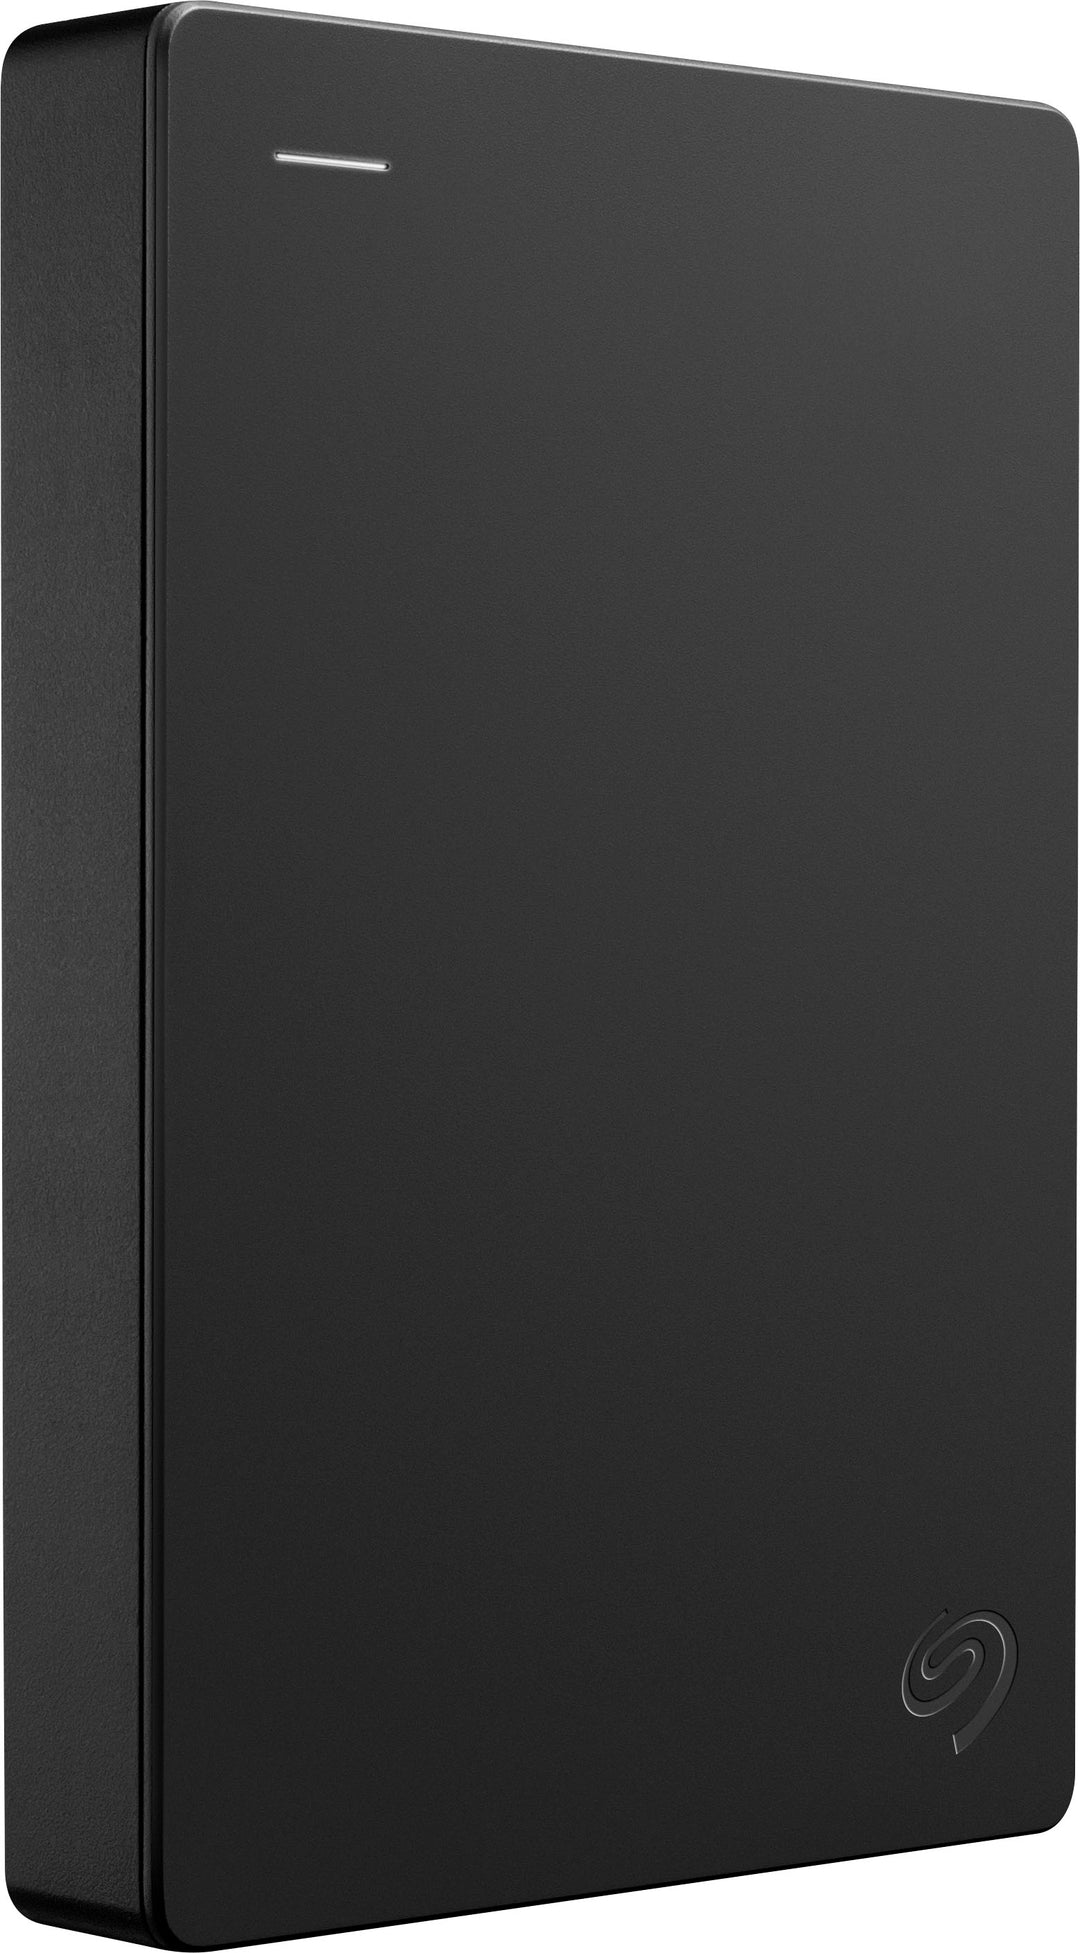 Seagate - Portable 4TB External USB 3.0 Hard Drive with Rescue Data Recovery Services - Black_8